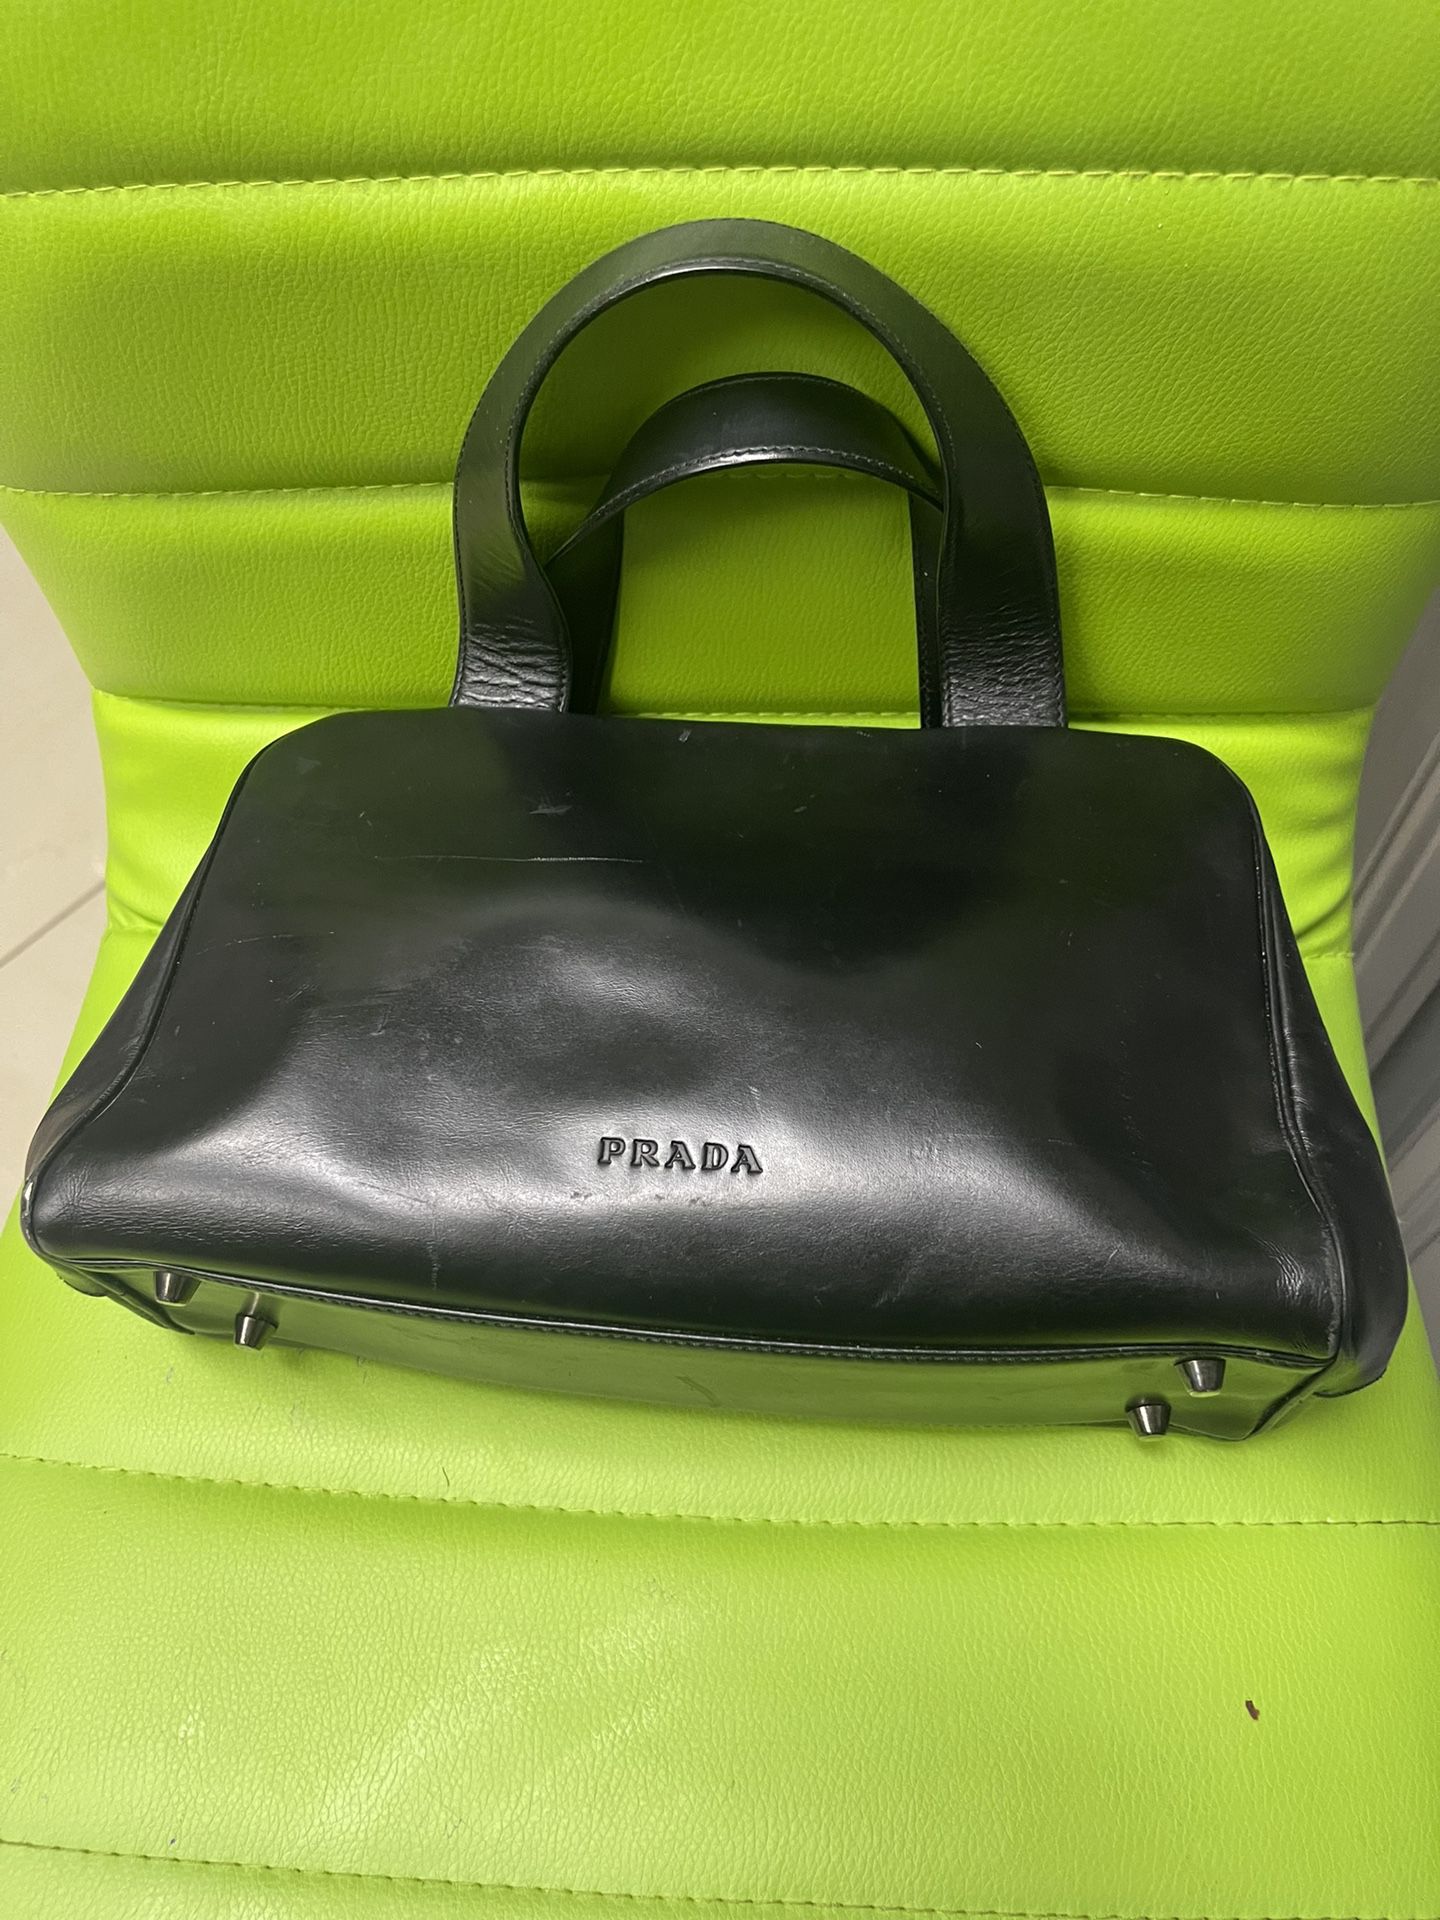 Authentic Prada Small Bag Some Small Scratches Not New 